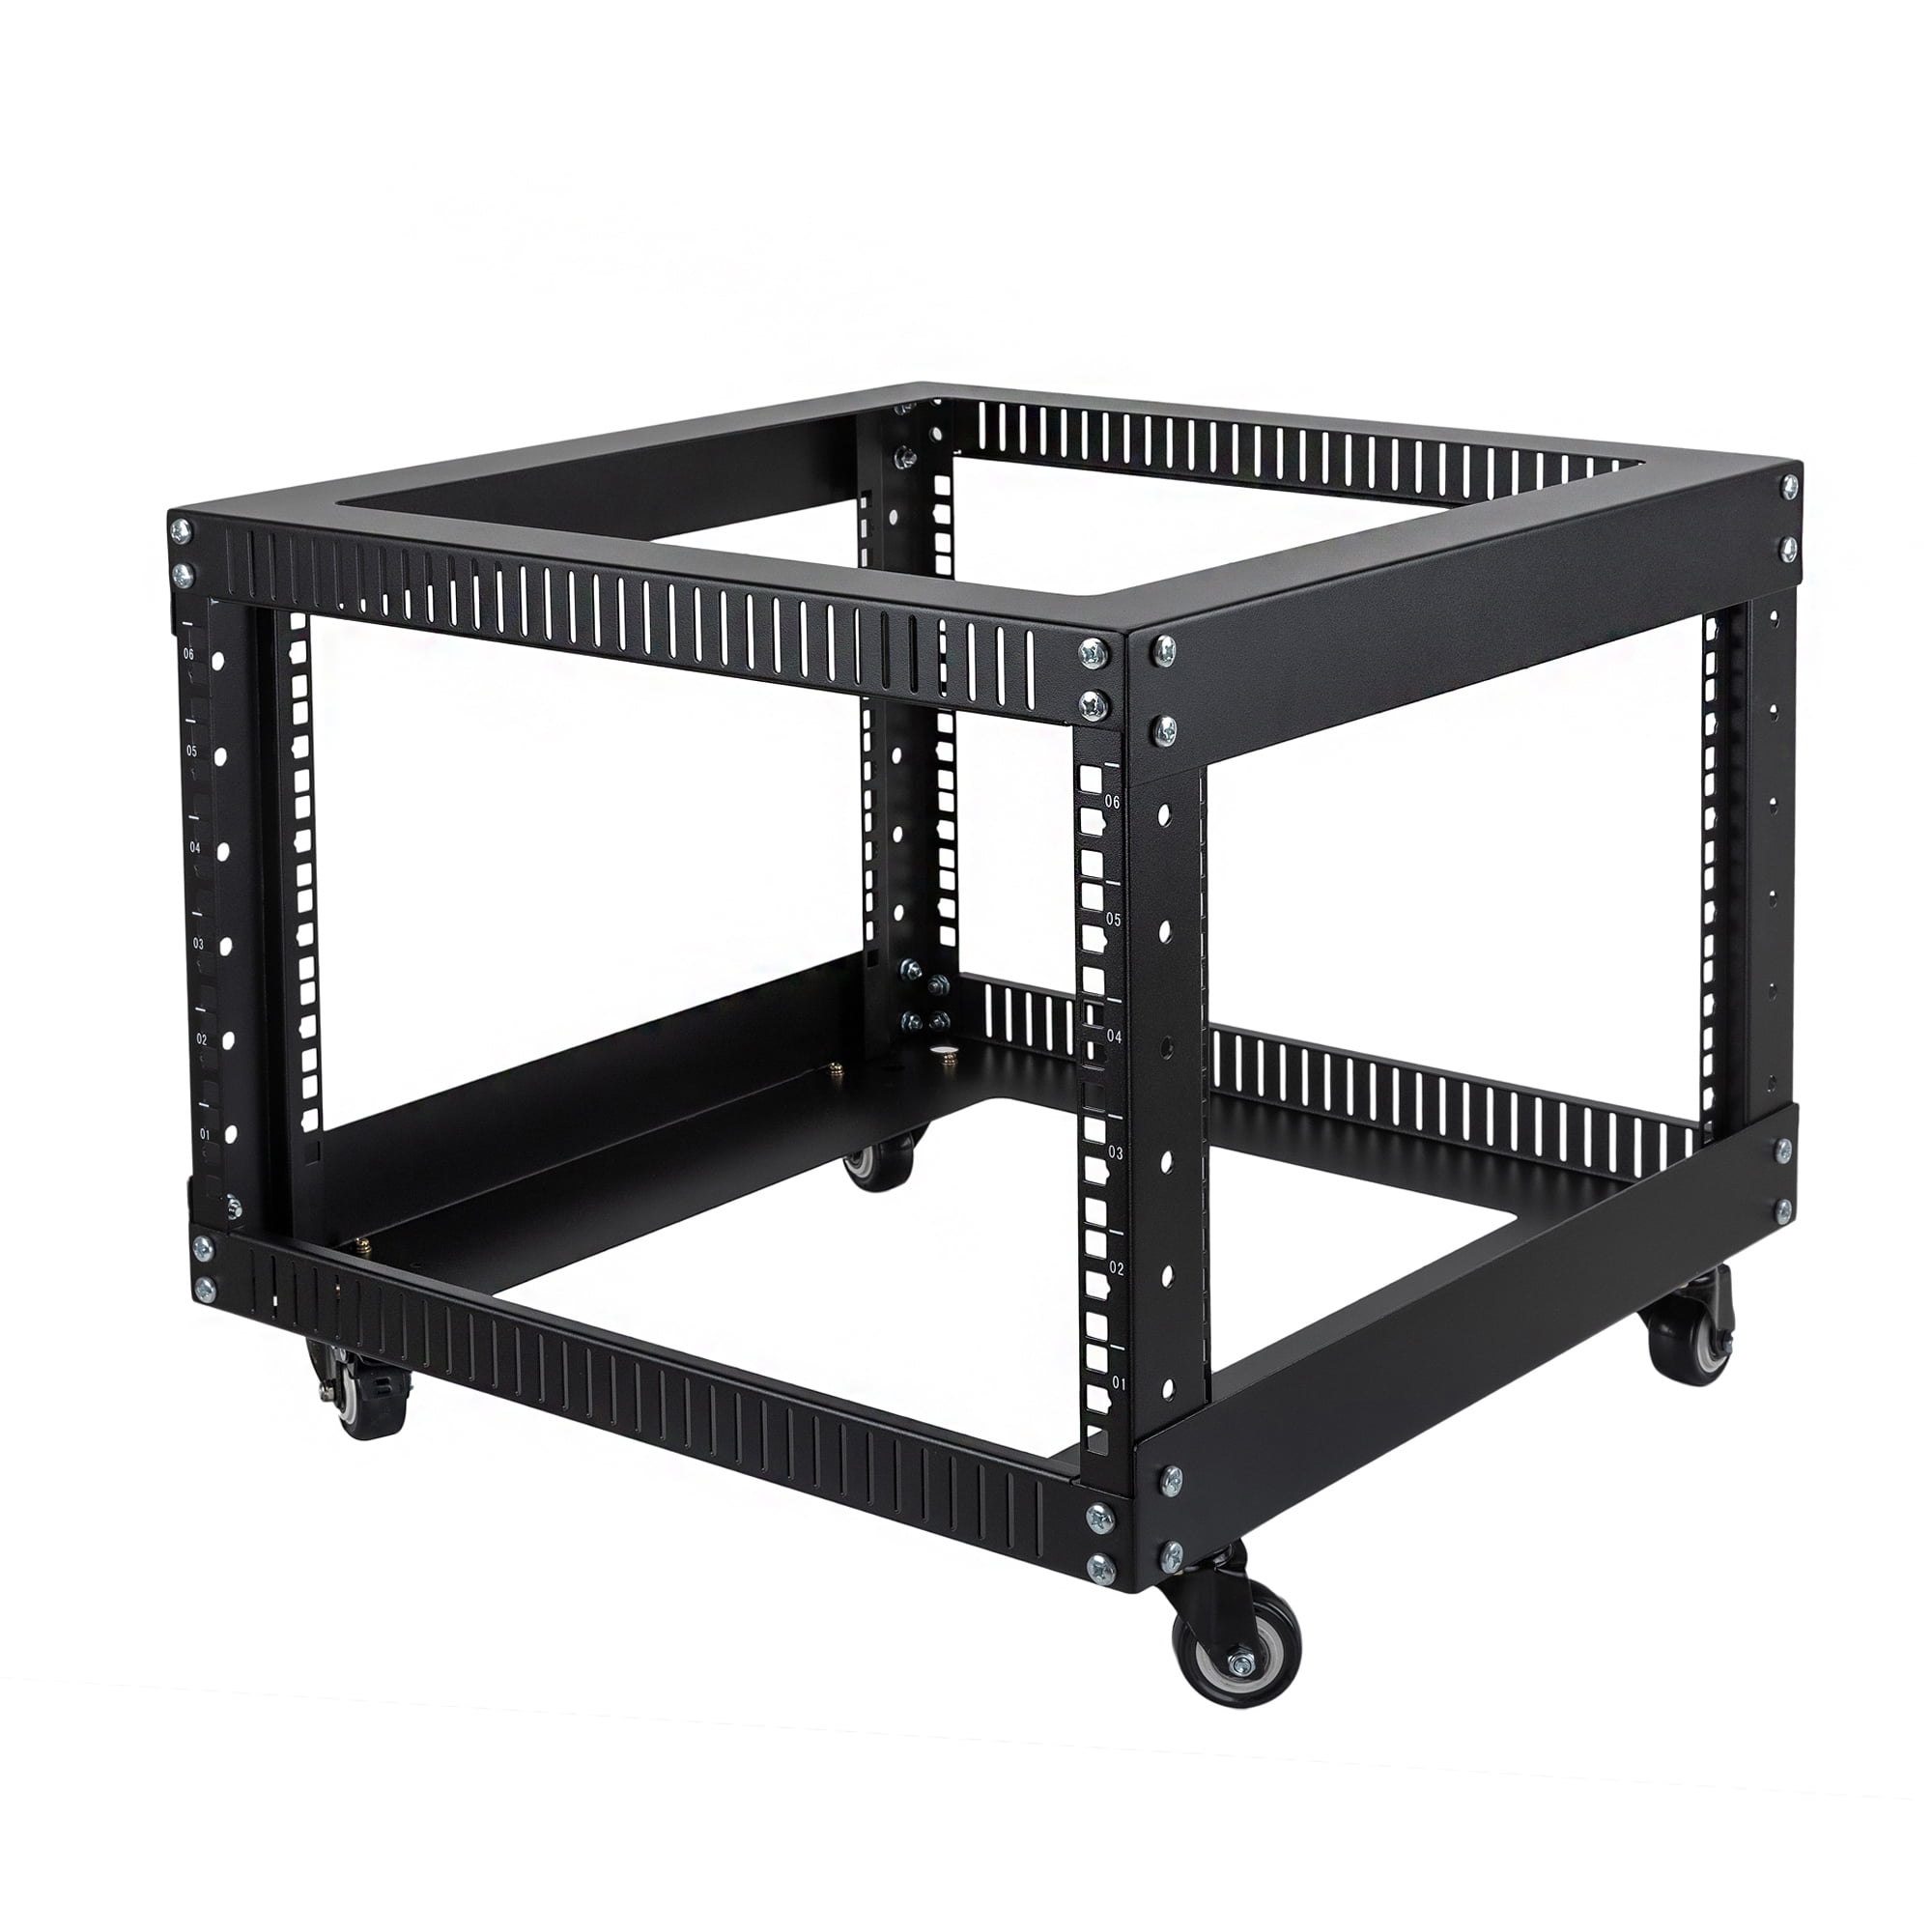 RIVECO 6U Open Frame Server Rack with Wheels- Heavy Duty 4 Post Quick ...